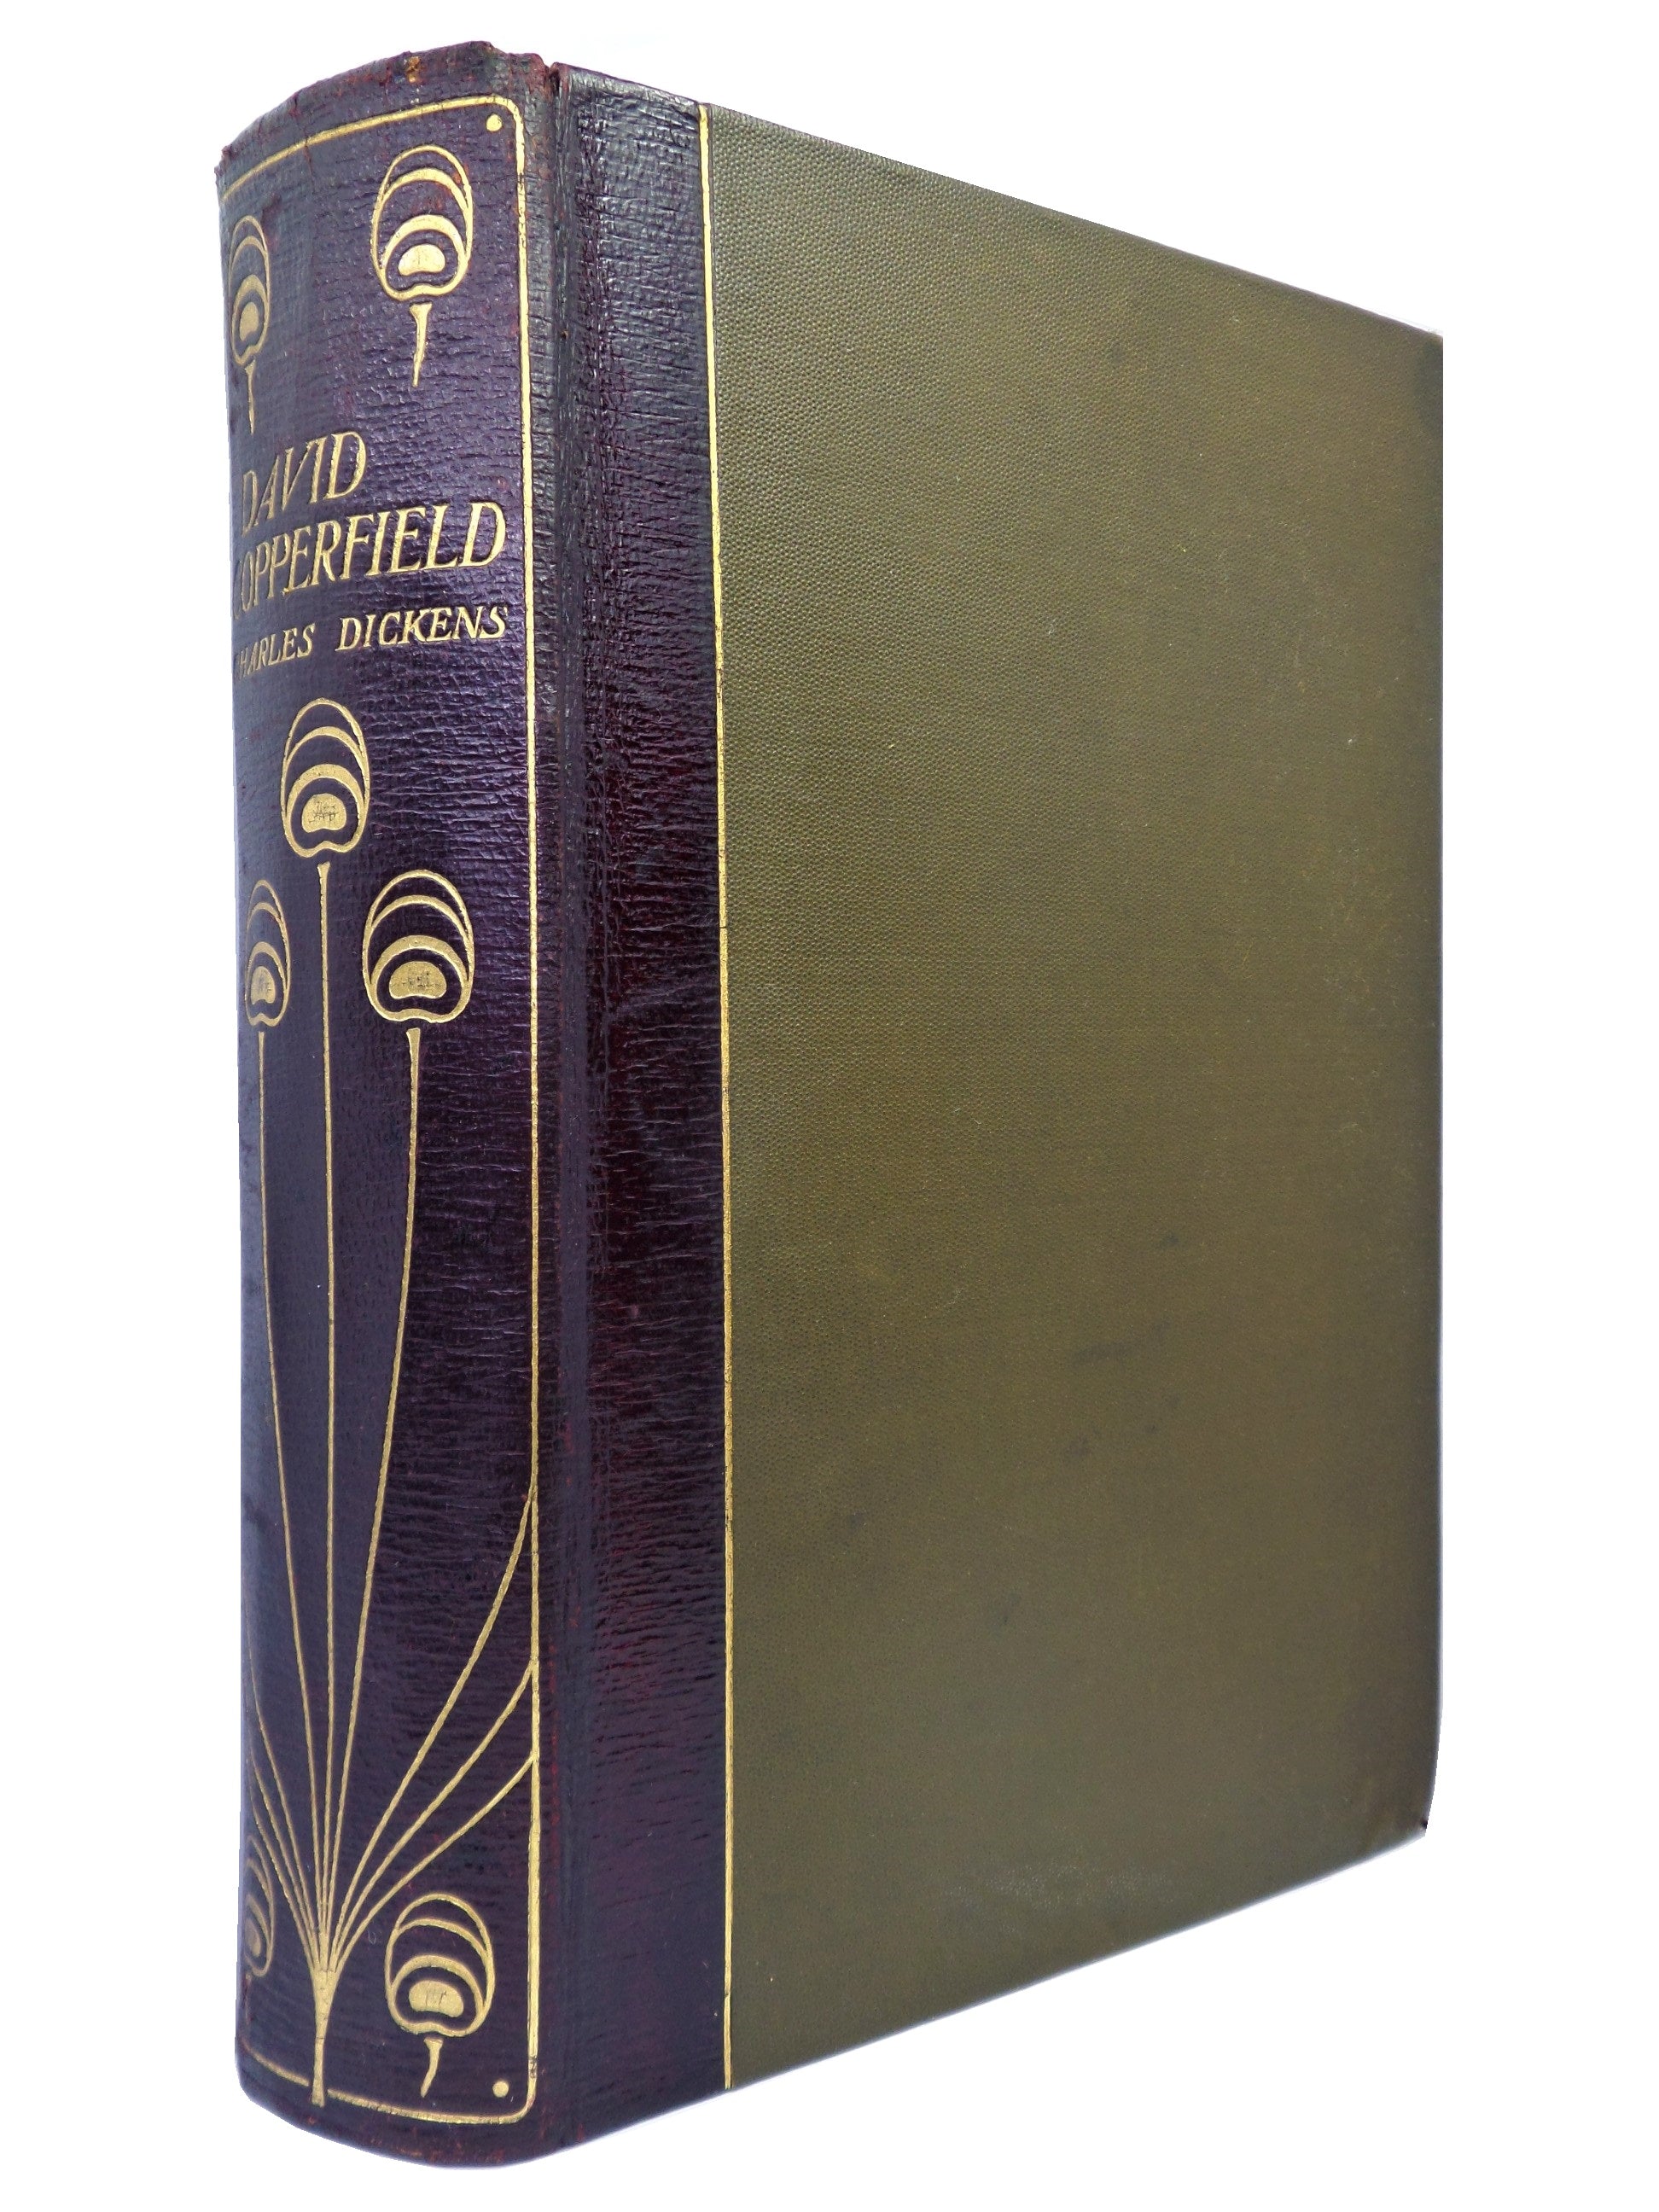 DAVID COPPERFIELD BY CHARLES DICKENS C1900 DELUXE LEATHER BINDING, TALWIN MORRIS